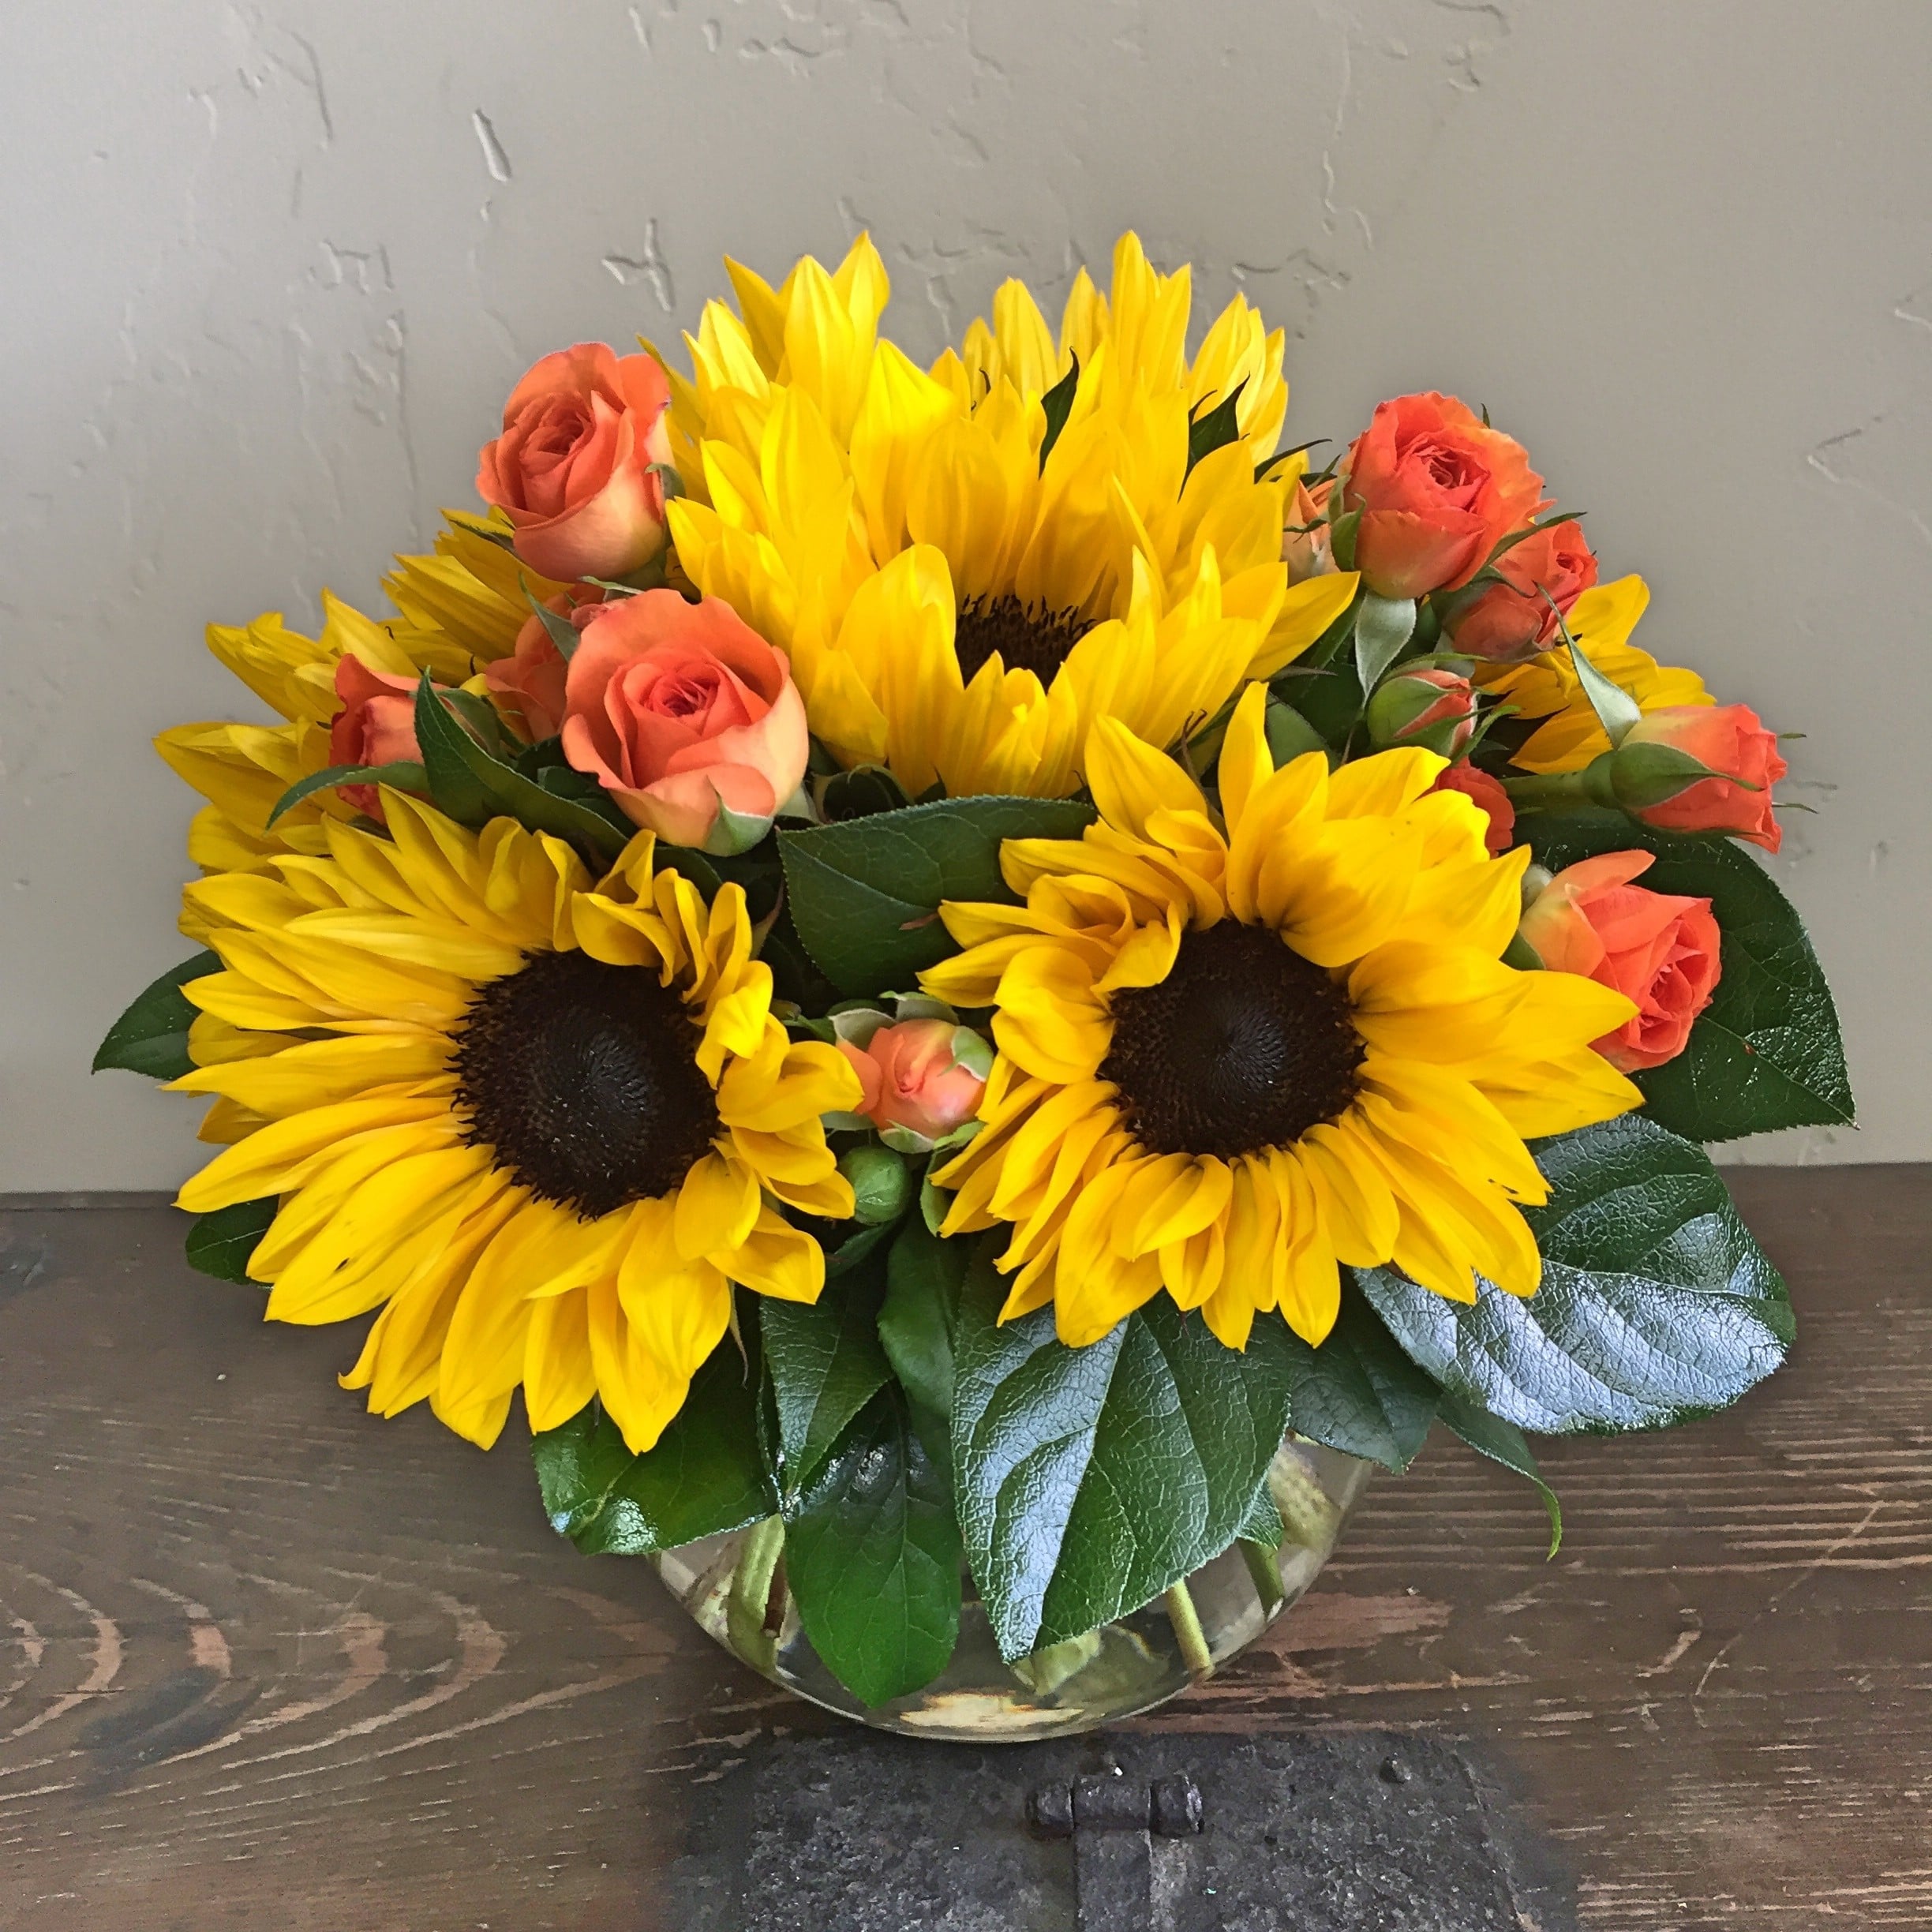 sunflowers, roses and greens in a small vase